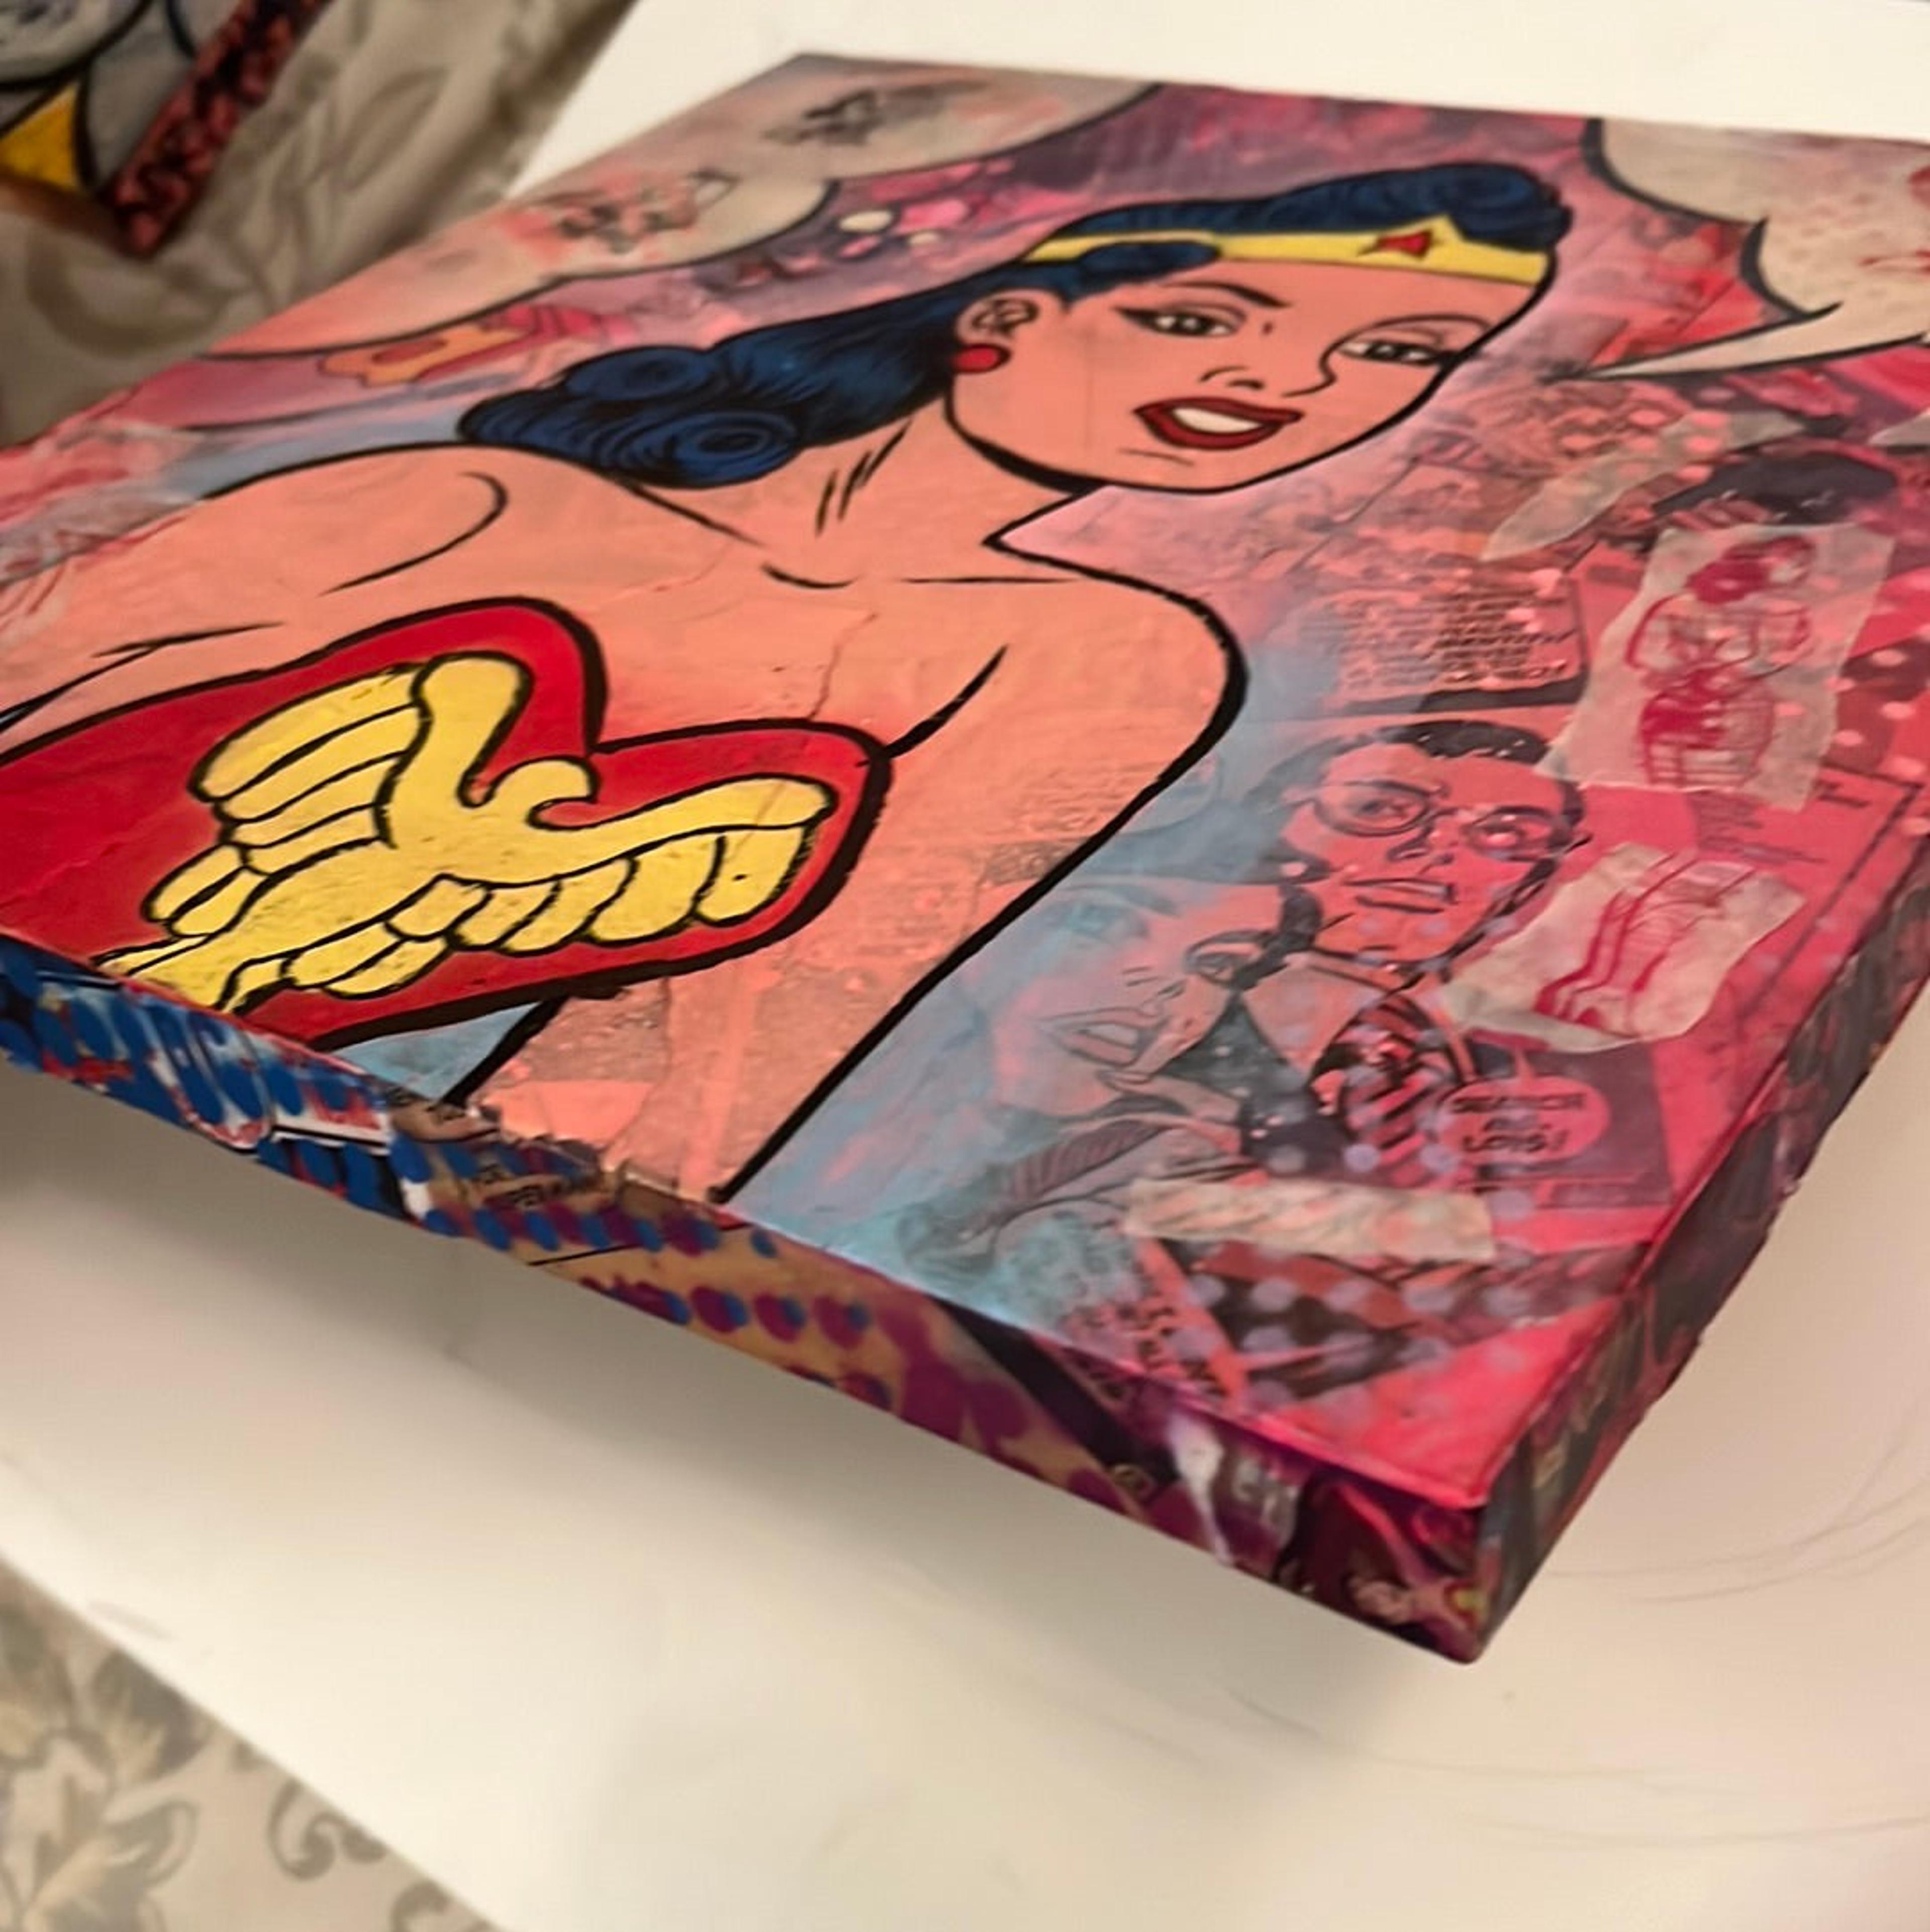 Alternate View 2 of "Wonder Woman Squared No. 1" original painting by Dr. Smash!  12